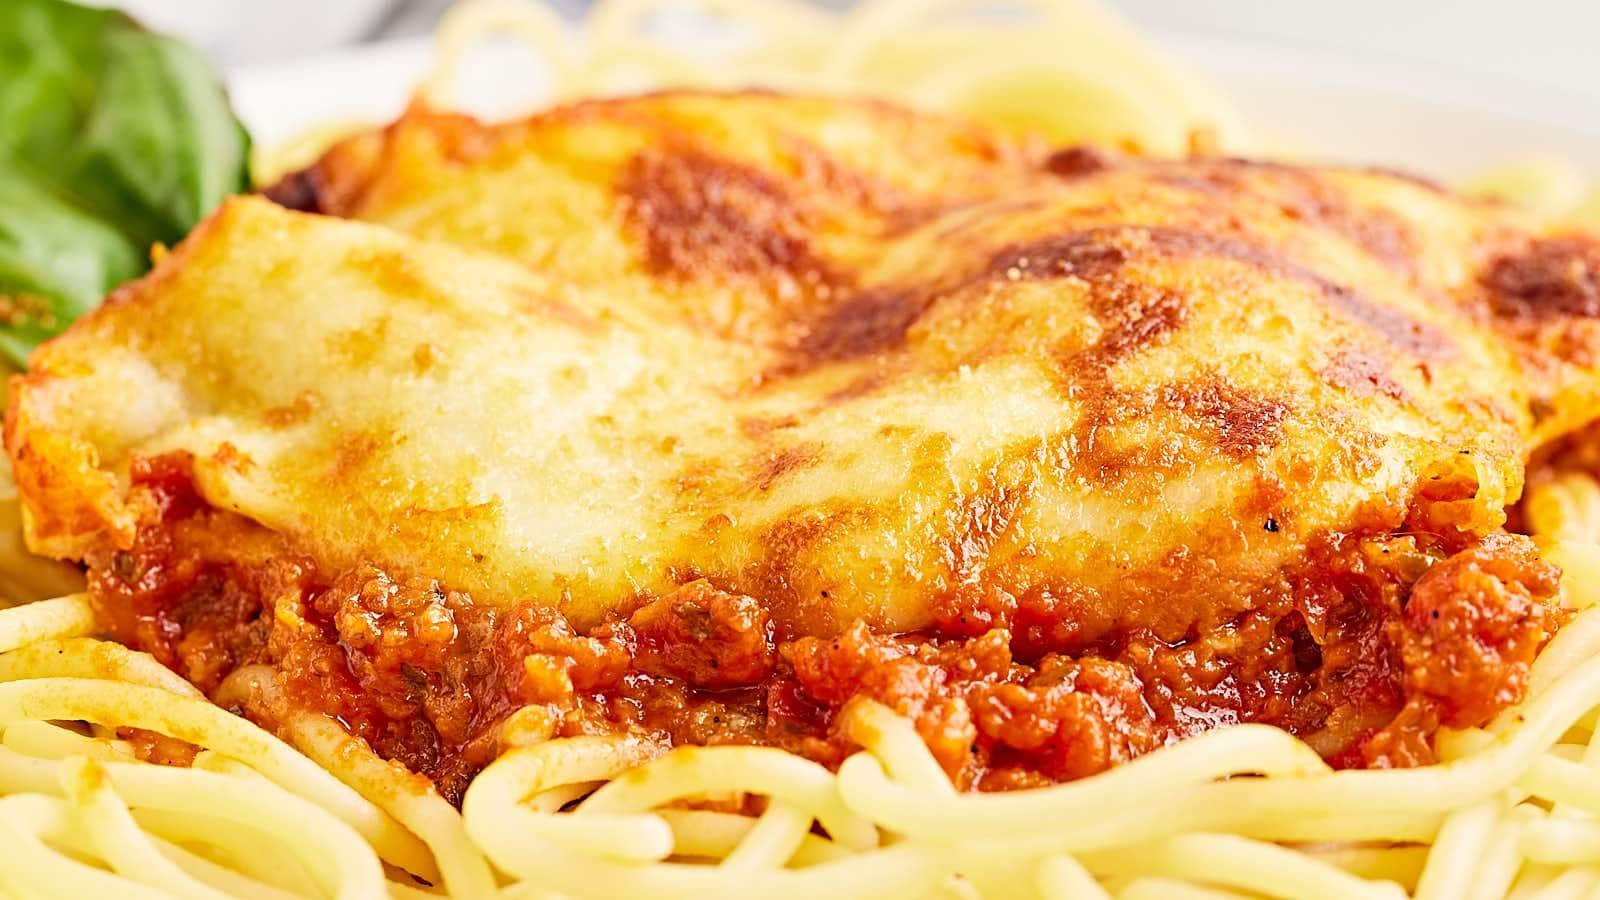 Chicken Parmesan recipe by Cheerful Cook.